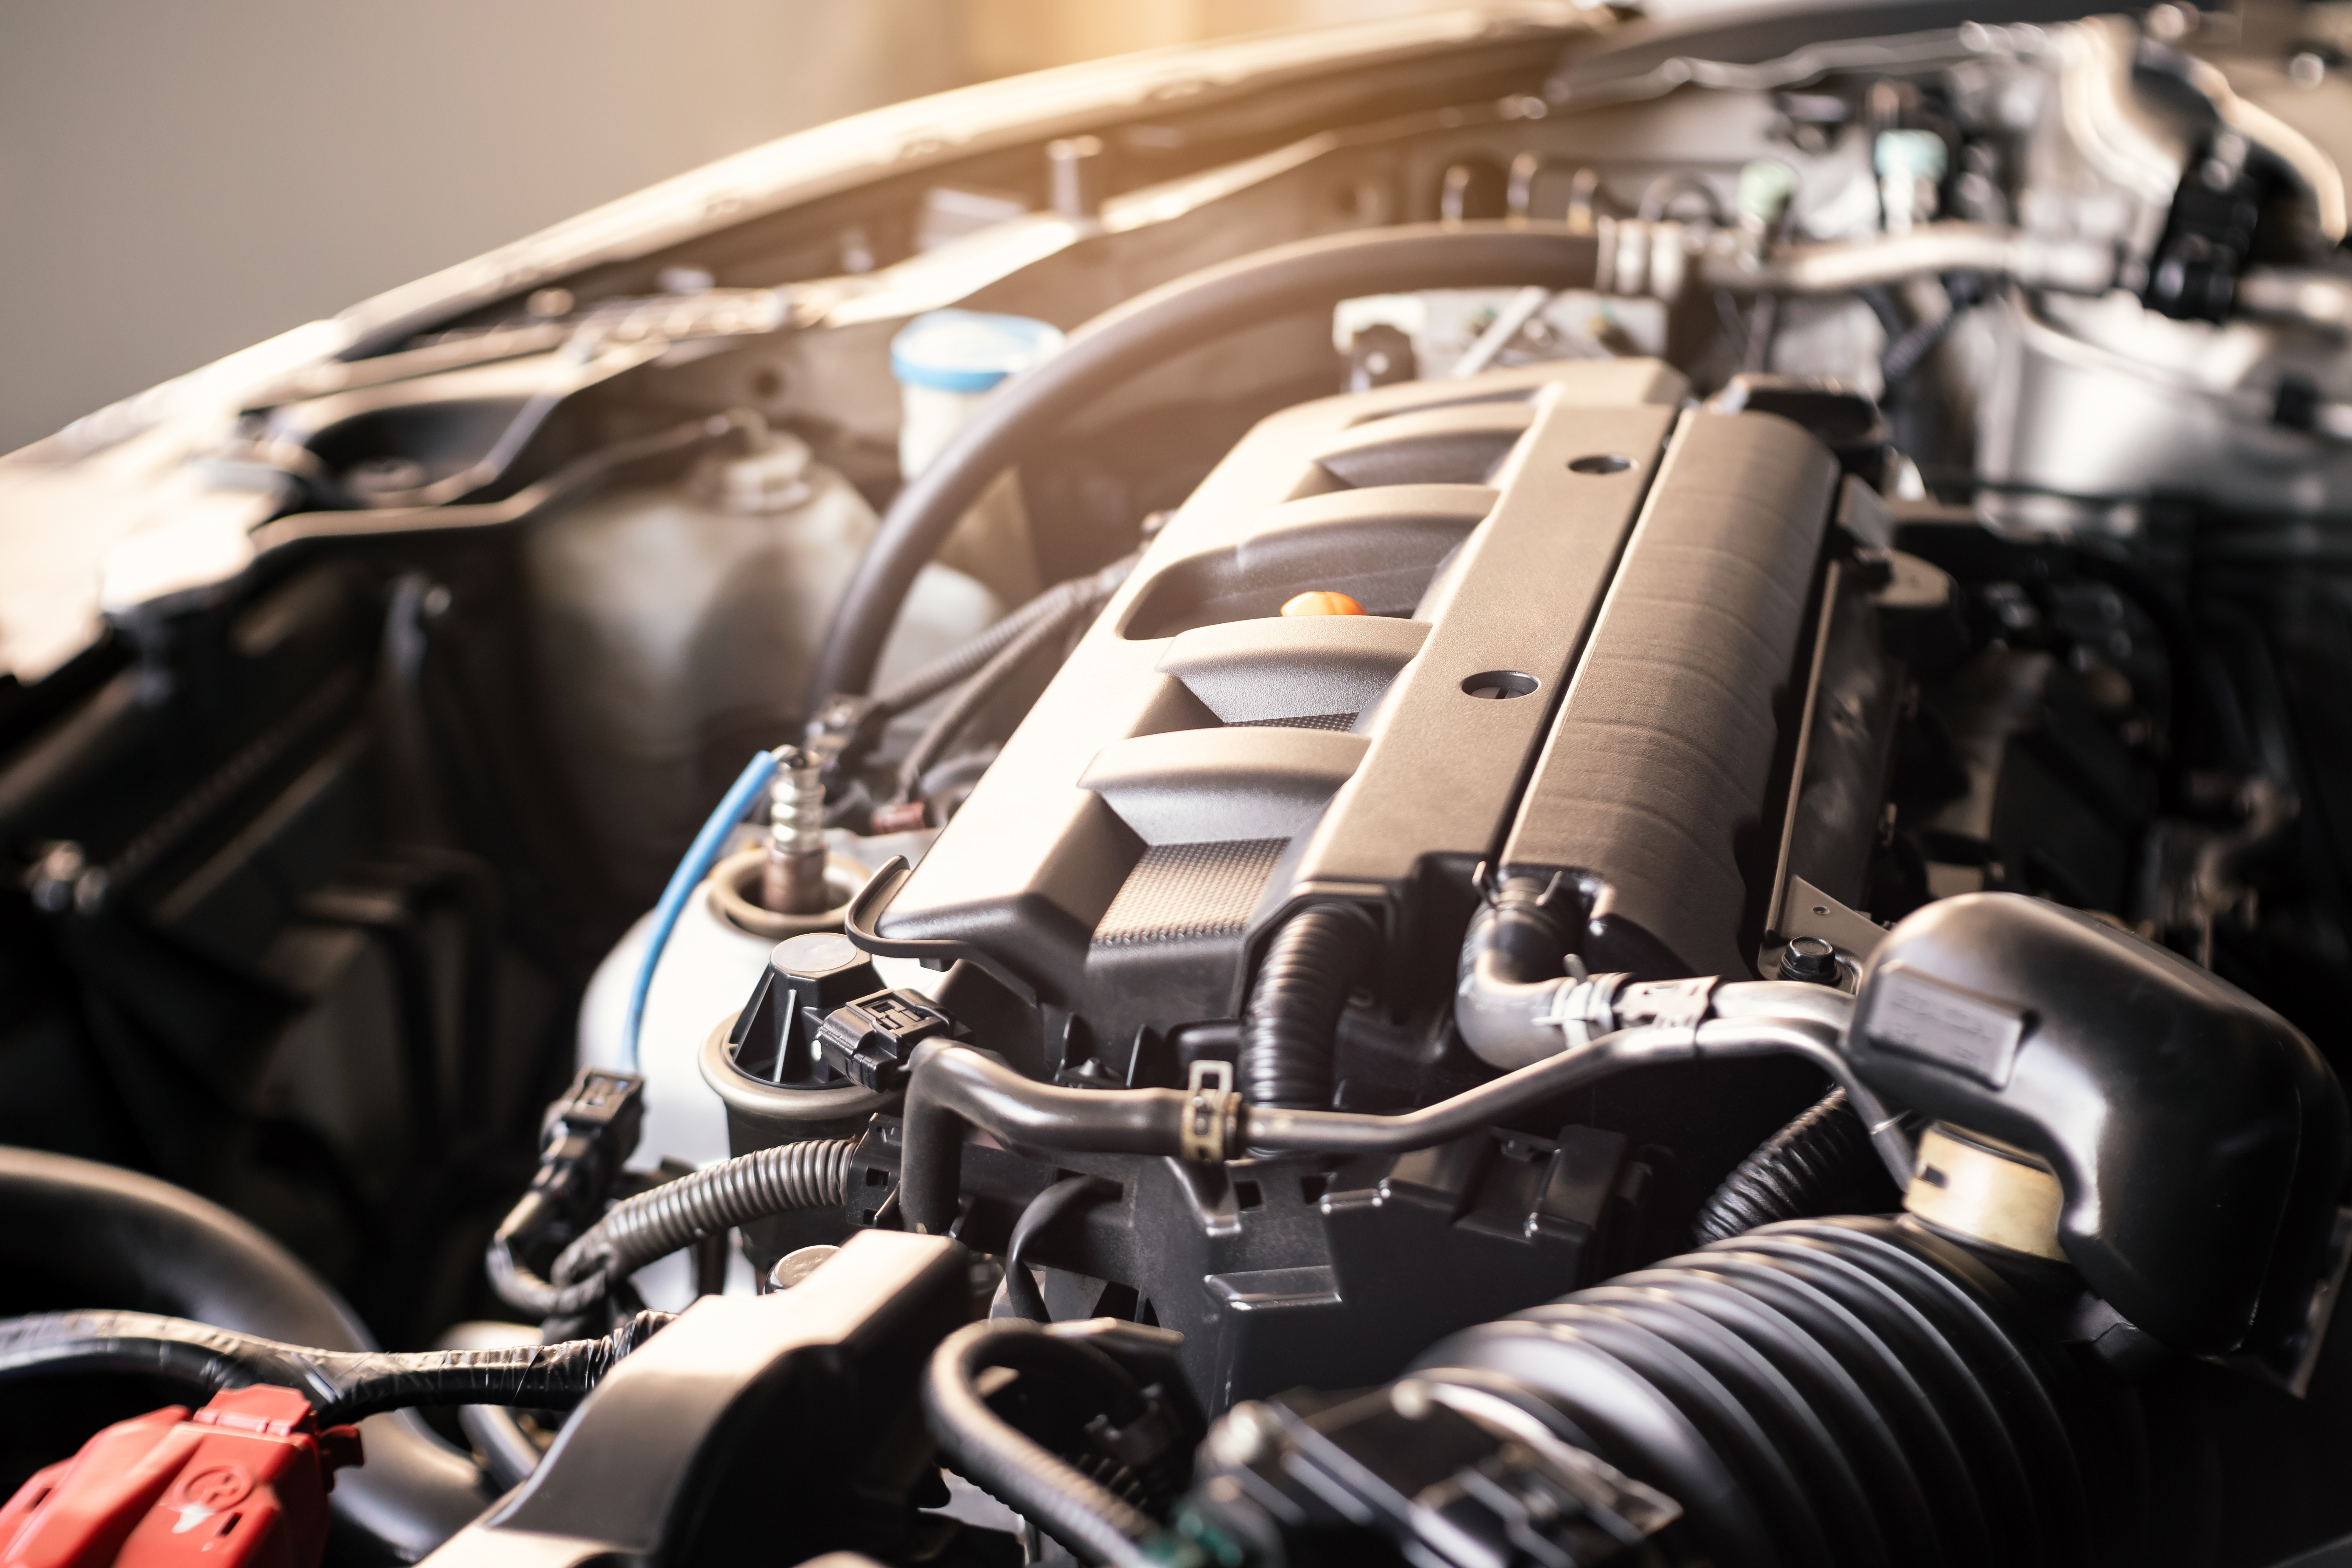 A diesel combustion engine - learn why getting intake manifold cleaning services is so important.